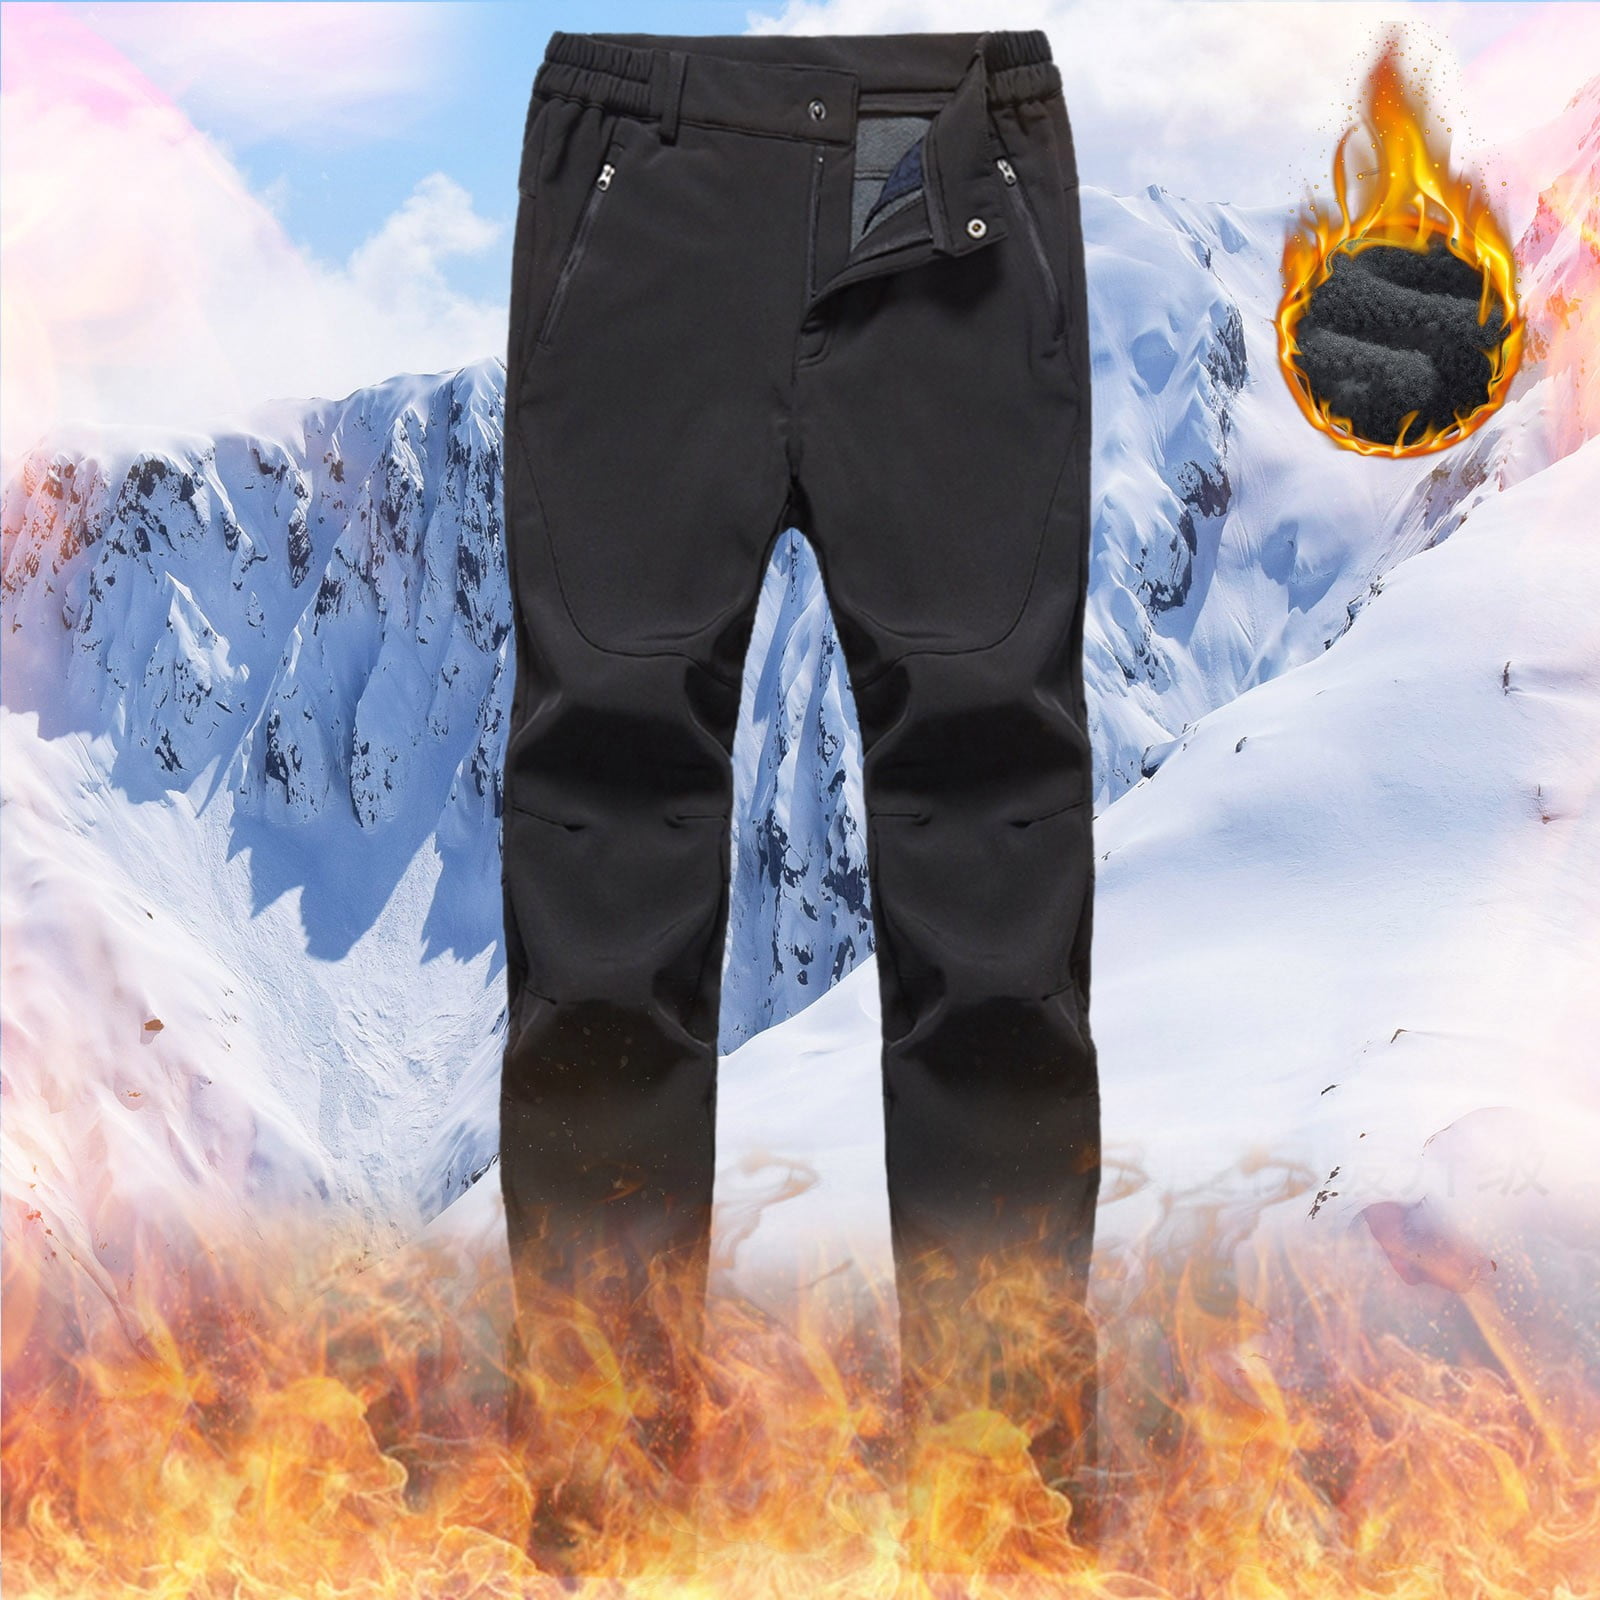  BALEAF Men's Fleece Lined Hiking Cargo Pants Waterproof  Softshell Snow Ski Pants Winter Outdoor Clothing with Zipper Pockets Black  Size XXL : Clothing, Shoes & Jewelry